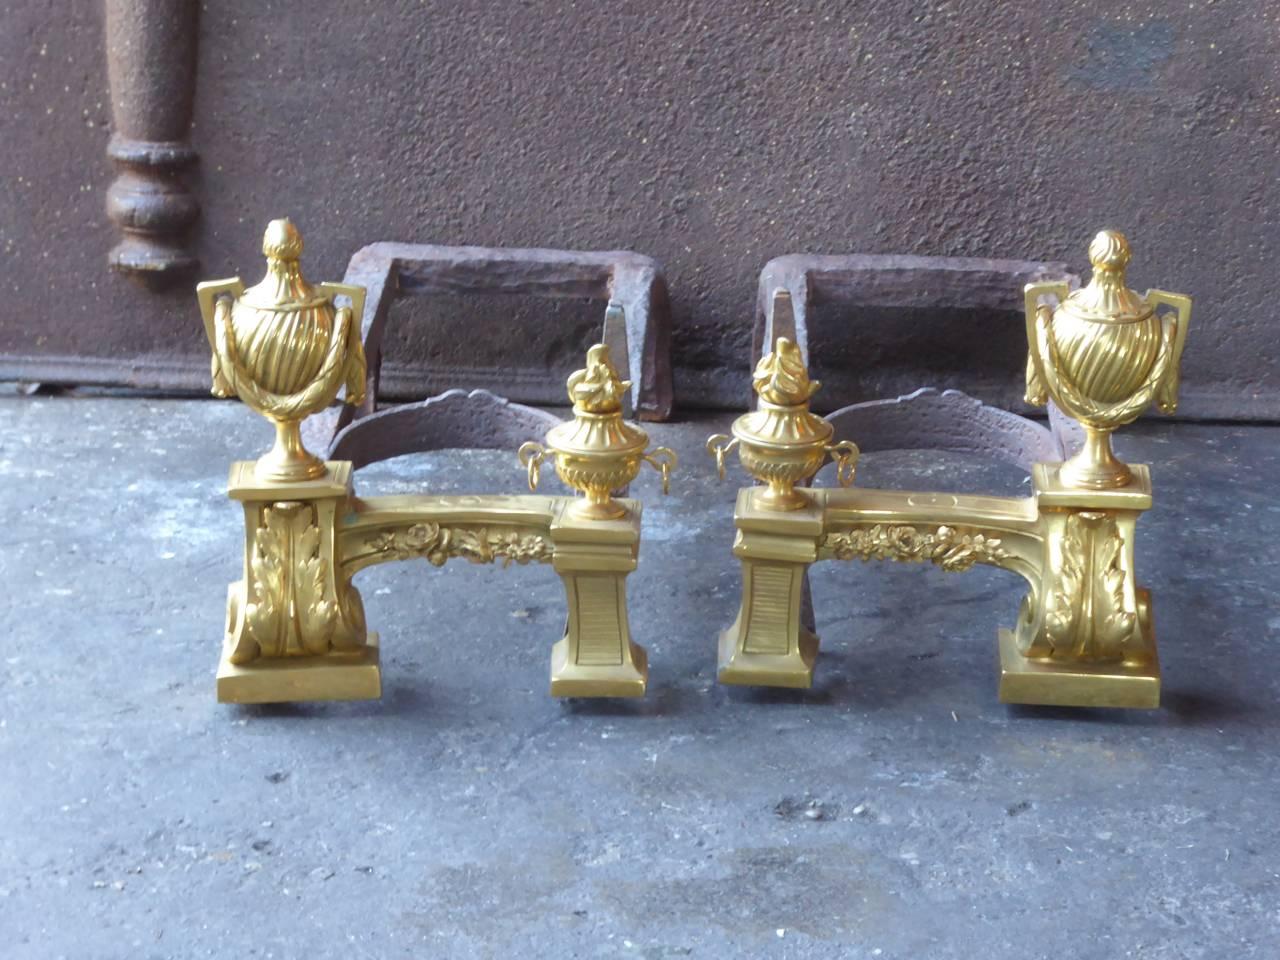 18th-19th century French neoclassical andirons made of ormolu and wrought iron. The condition is good.

One of the most valuable secrets of French metalworkers in the 18th and early 19th century was the gilding of brass and bronze, called ormolu.